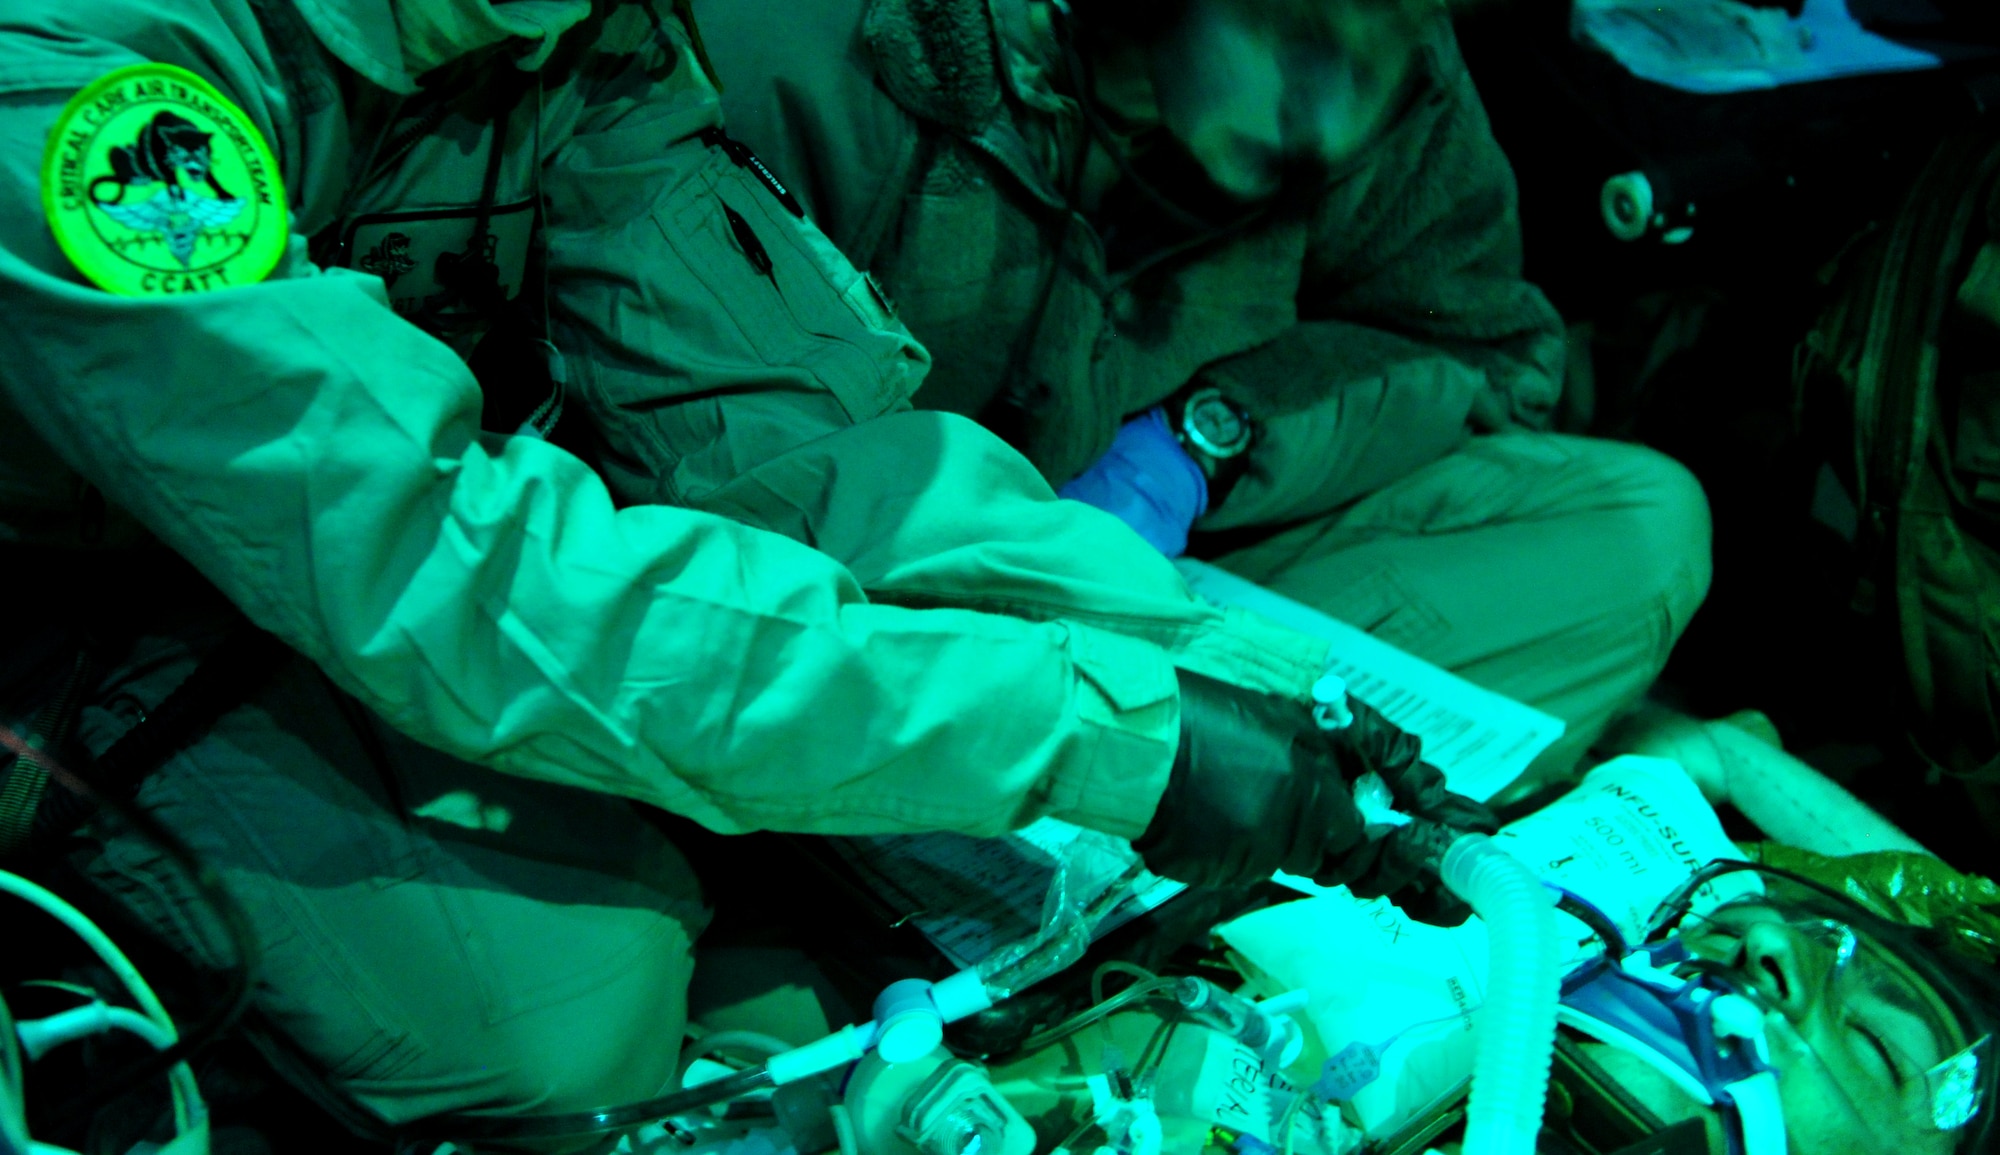 CAMP BASTION, Afghanistan -- A member of the 76th Expeditionary Rescue Squadron Critical Care Air Transport team provides care to a patient onboard a flight to a higher care medical facility. The teams are the first all-Air Force CCAT and AE teams to fly with the only fixed wing aircraft dedicated to medical evacuation missions in Afghanistan. (U.S. Air Force photo/Senior Airman Tyler Placie)